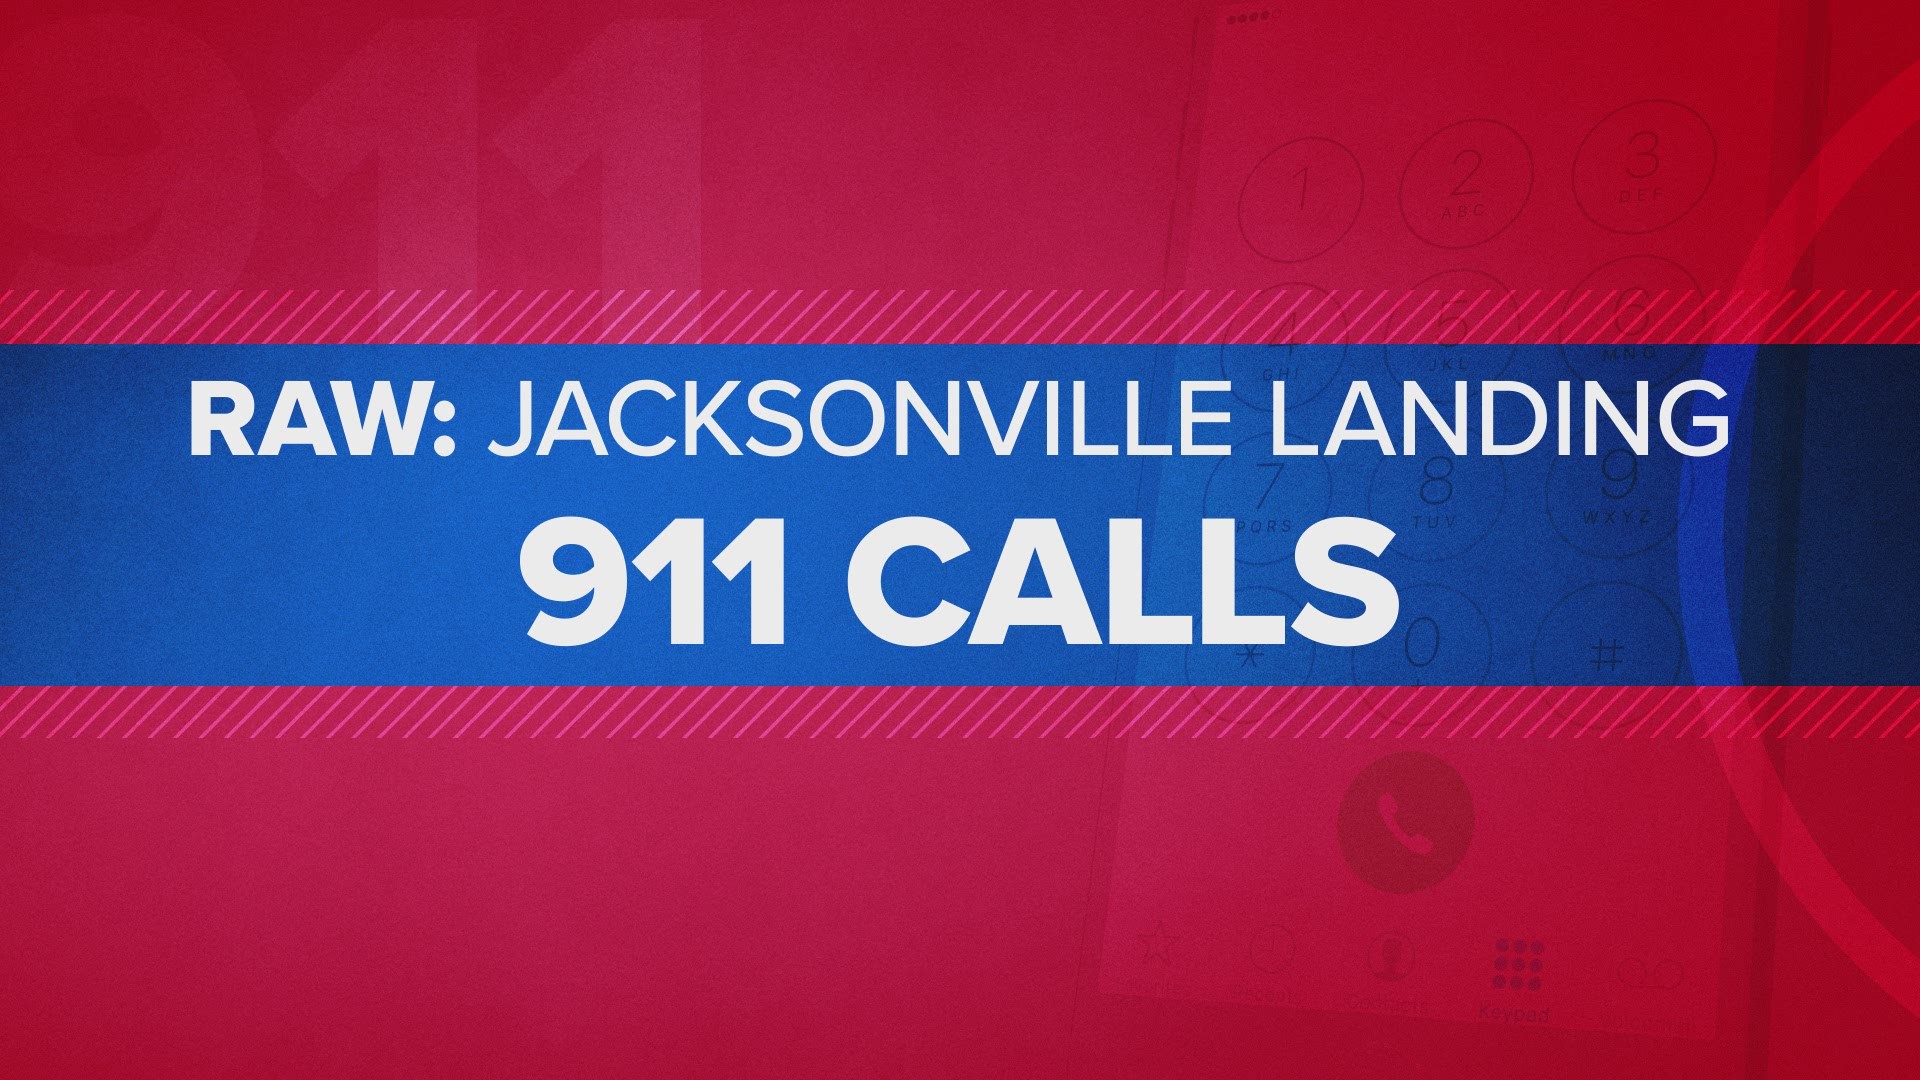 A victim of the shooting at the Jacksonville Landing called 911 to give his location. He reports to the 911 dispatcher that he was shot in the shin and is hiding out under the CSX building.